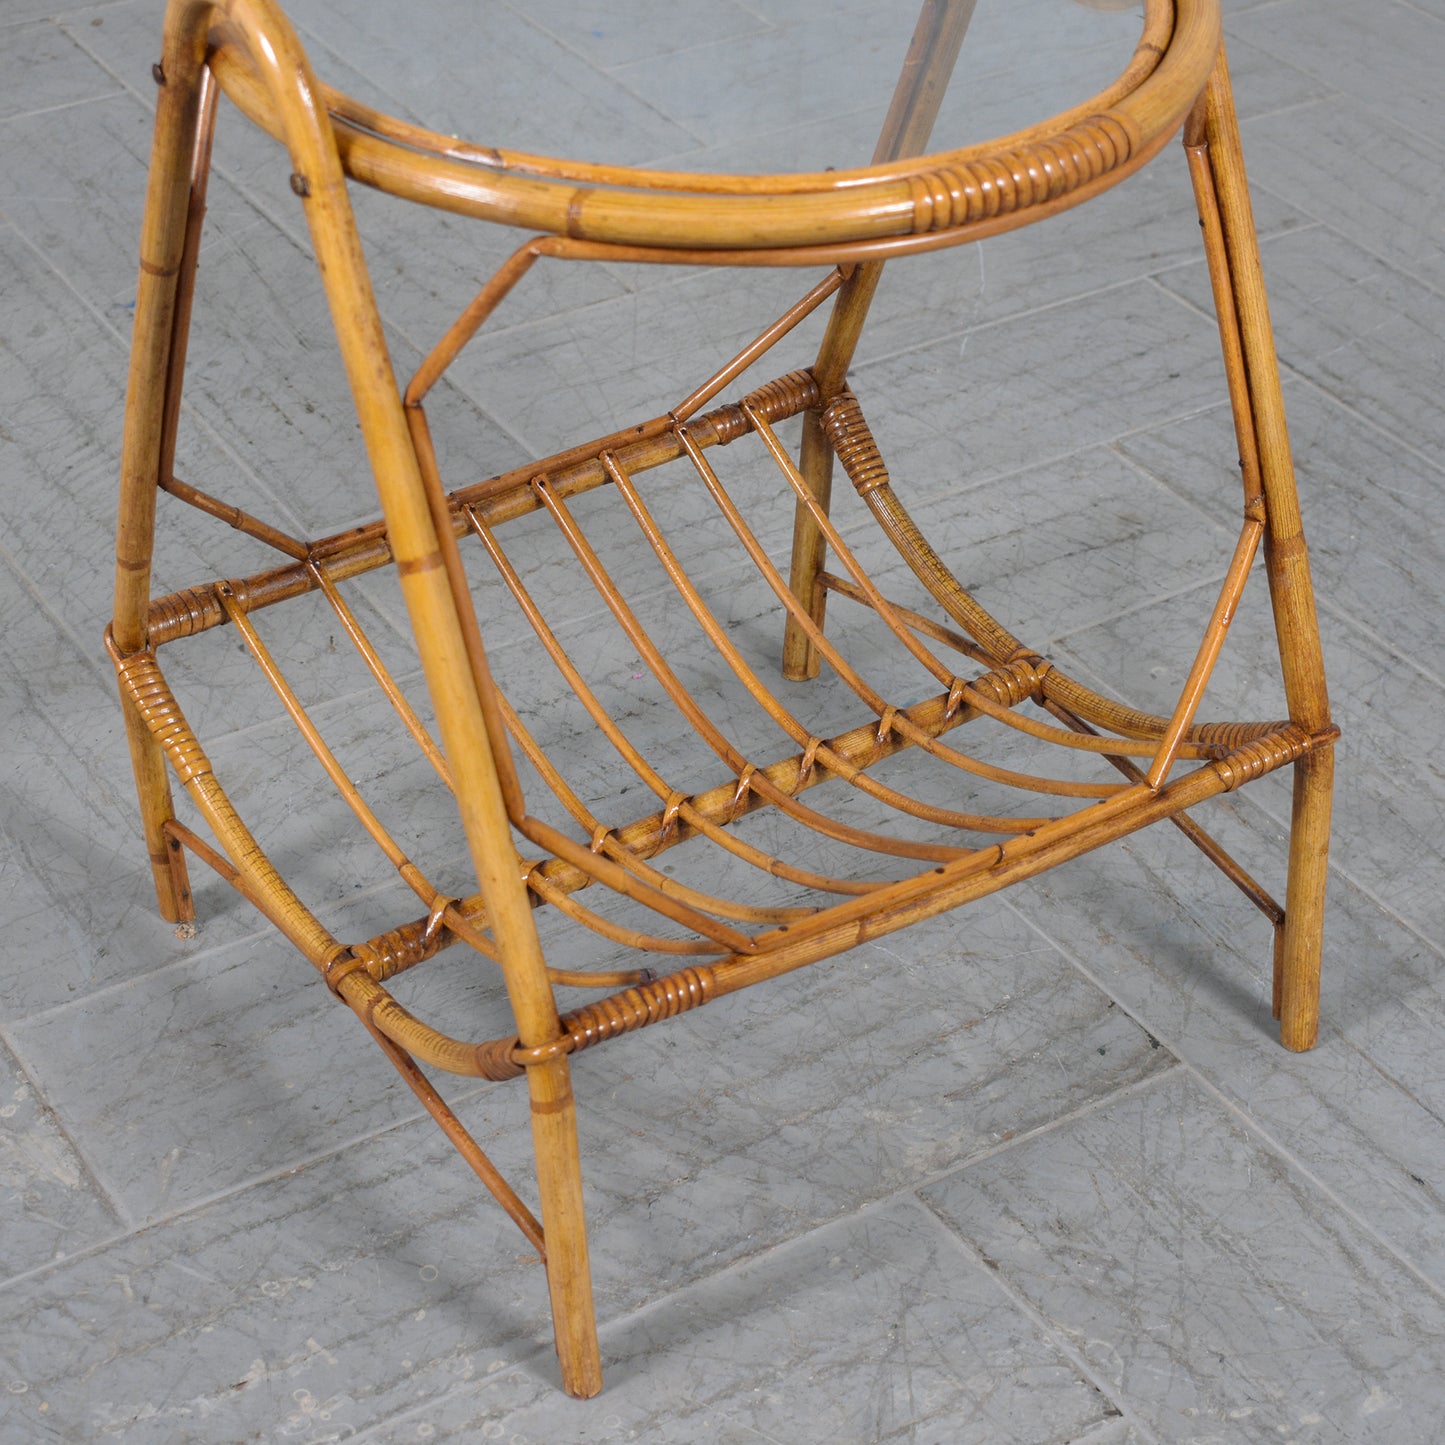 1960s Vintage Bamboo Side Table with Magazine Rack - Timeless Elegance